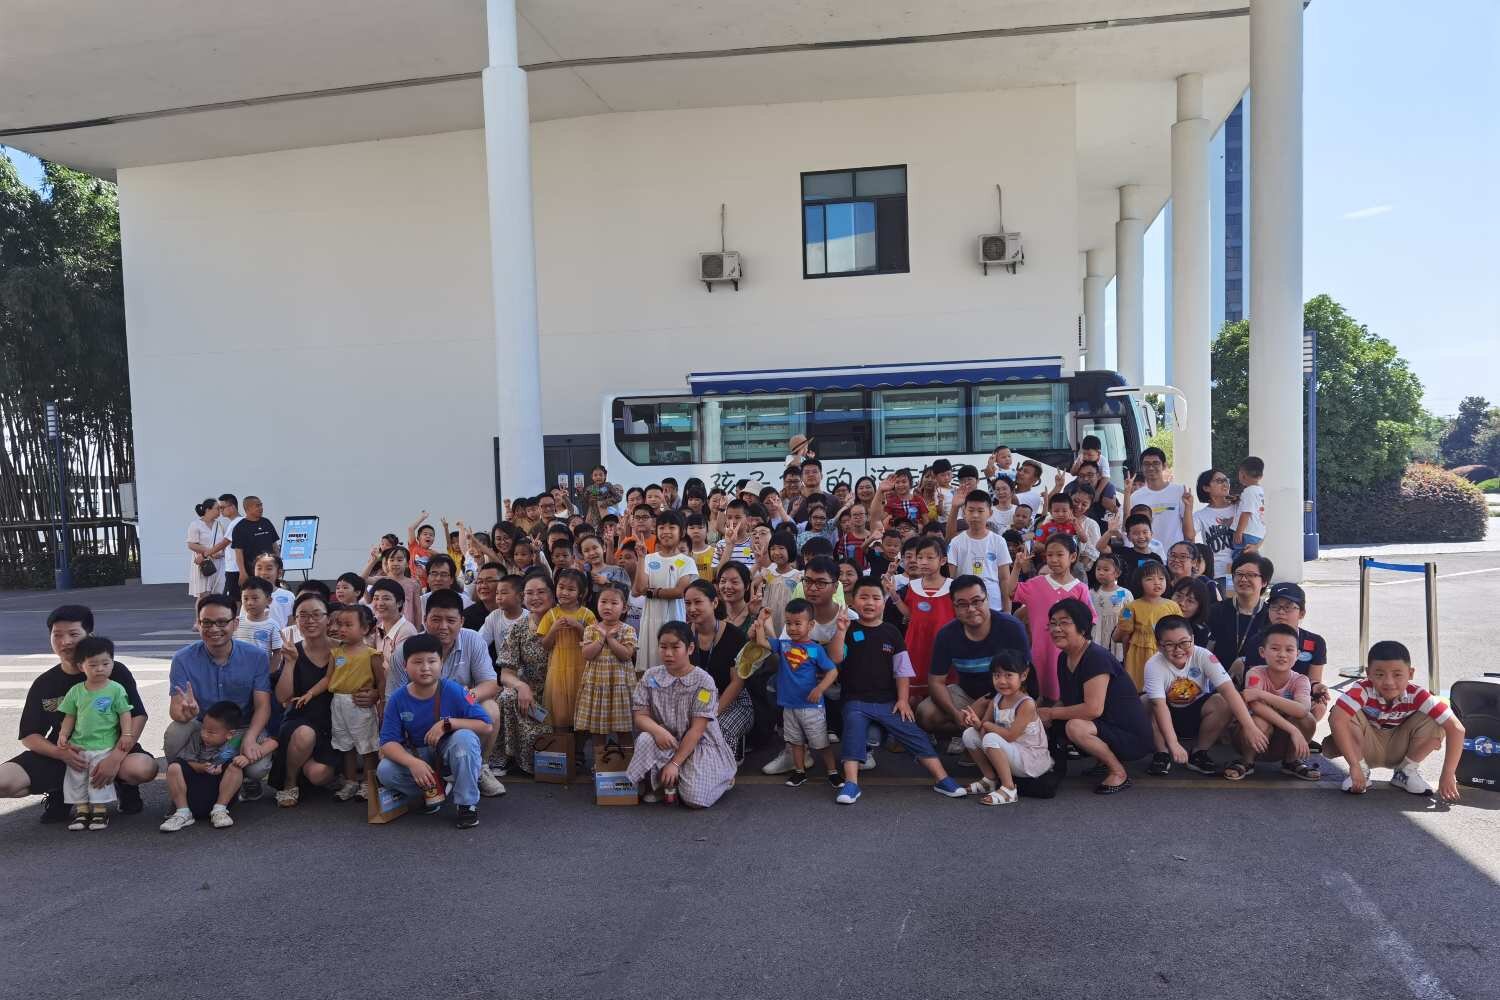 GiantKONE employees' family and the Mobile Library